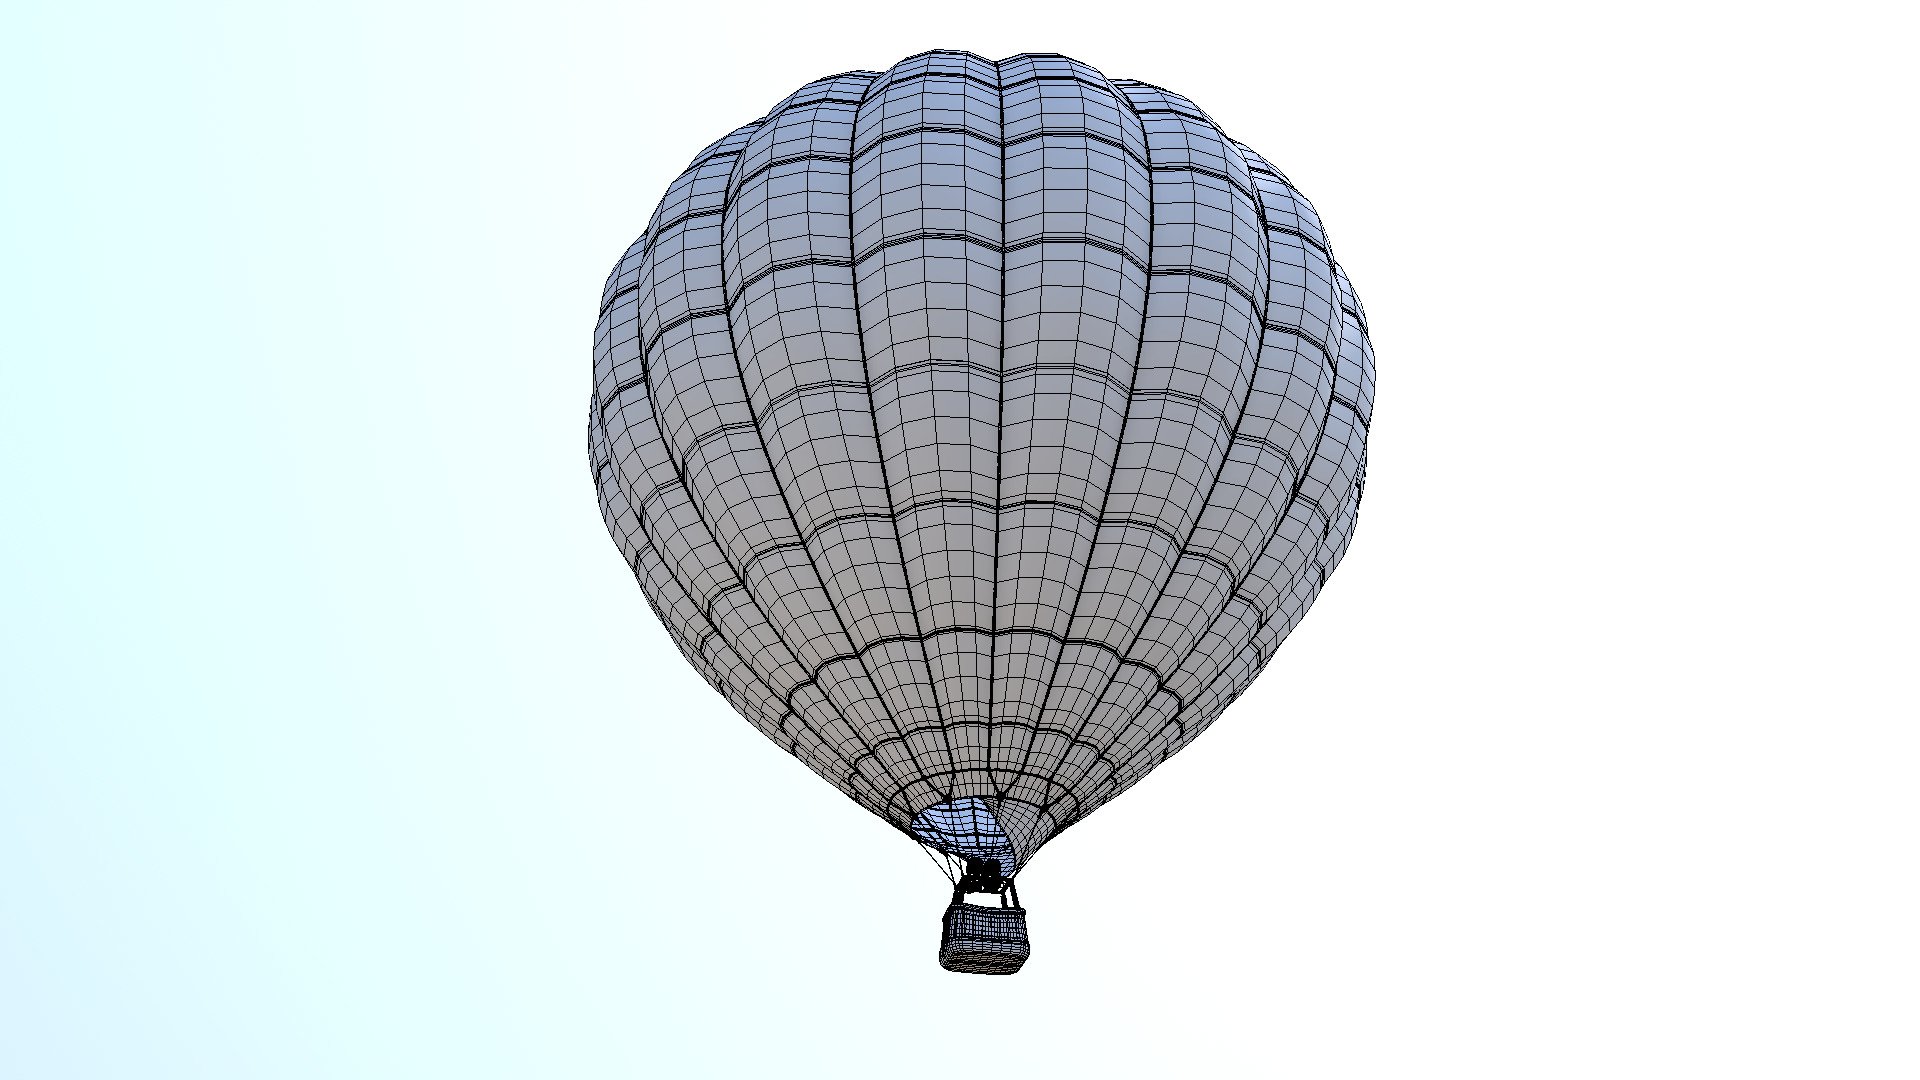 Model Preview with no textures, hot air balloon modelled for a personal vfx project, wireframes view - Hot Air Balloon Preview - 3D model by Francesco Formica (@Francesco_ff91) 3d model